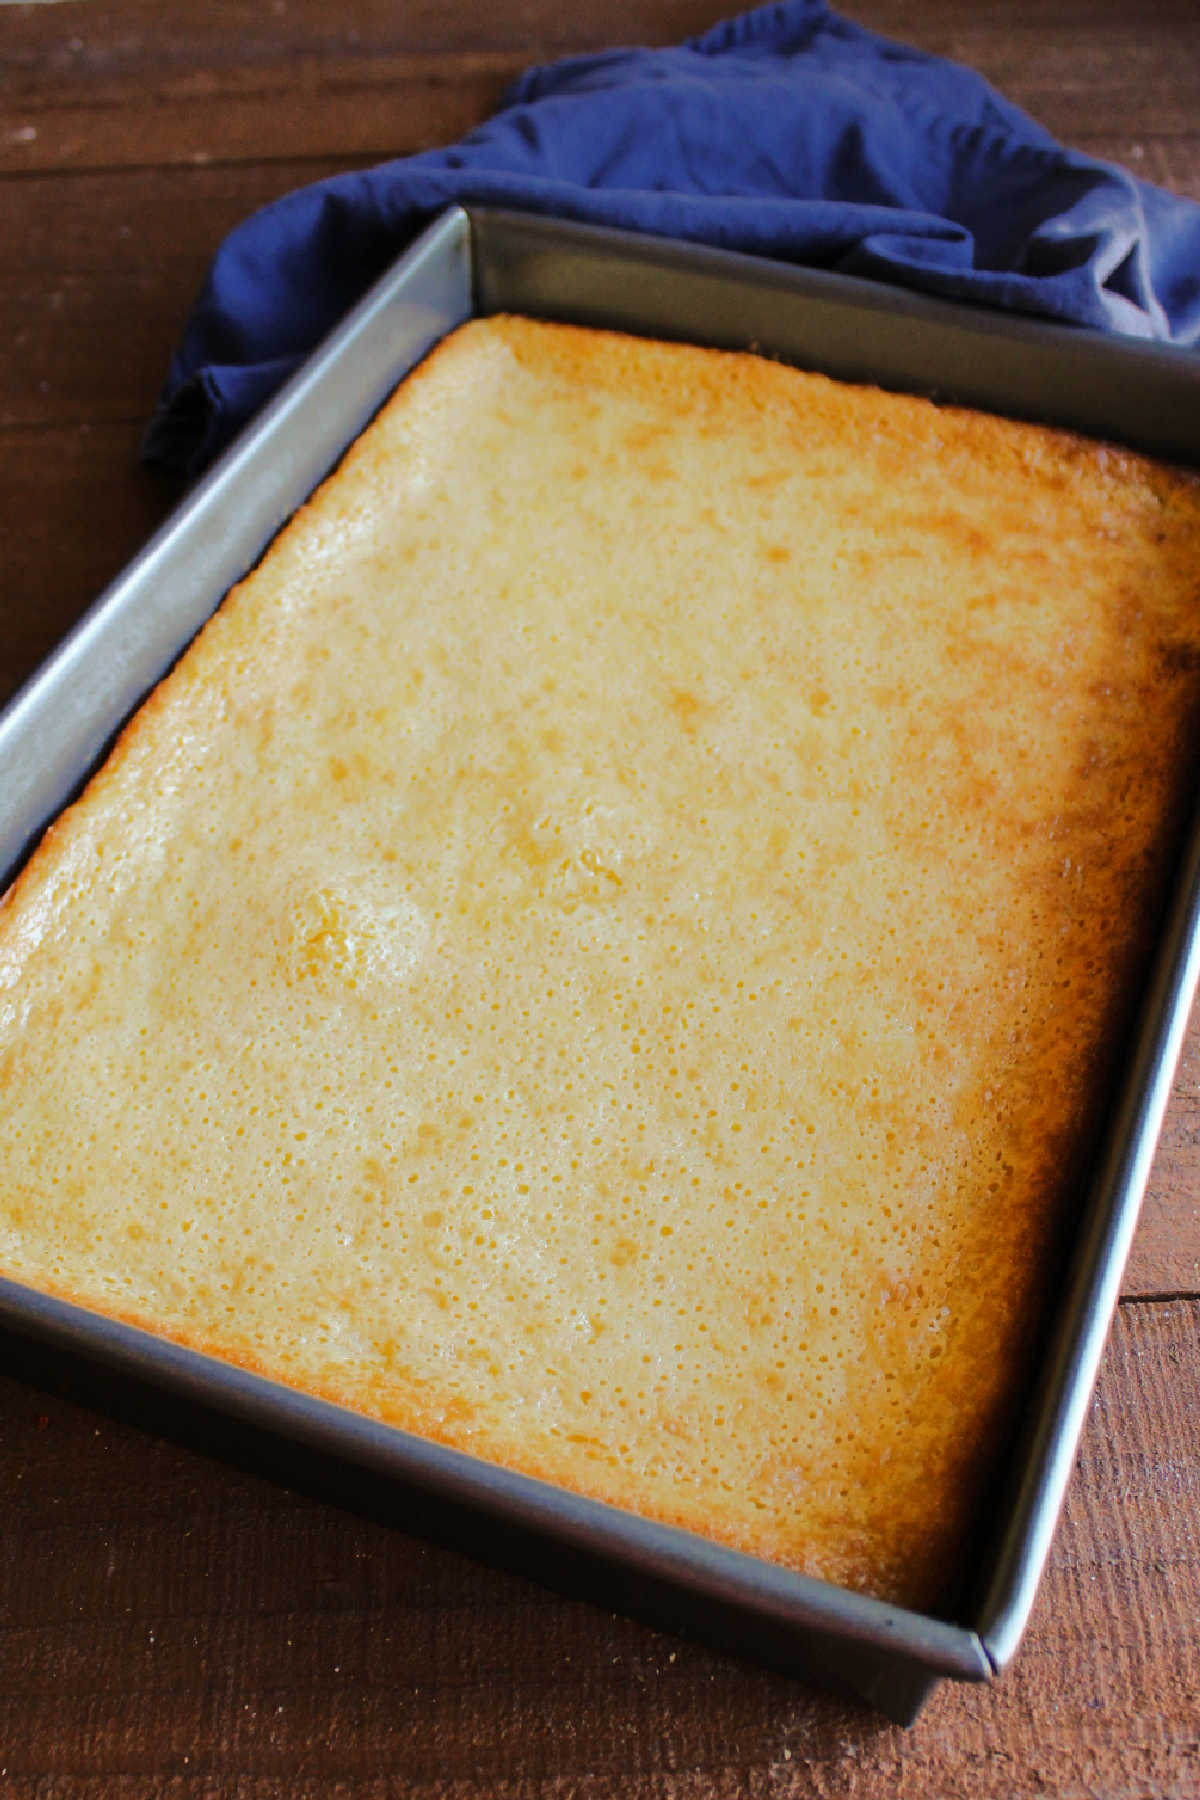 Lemon gooey butter cake fresh from the oven, with golden brown edges and gooey center.